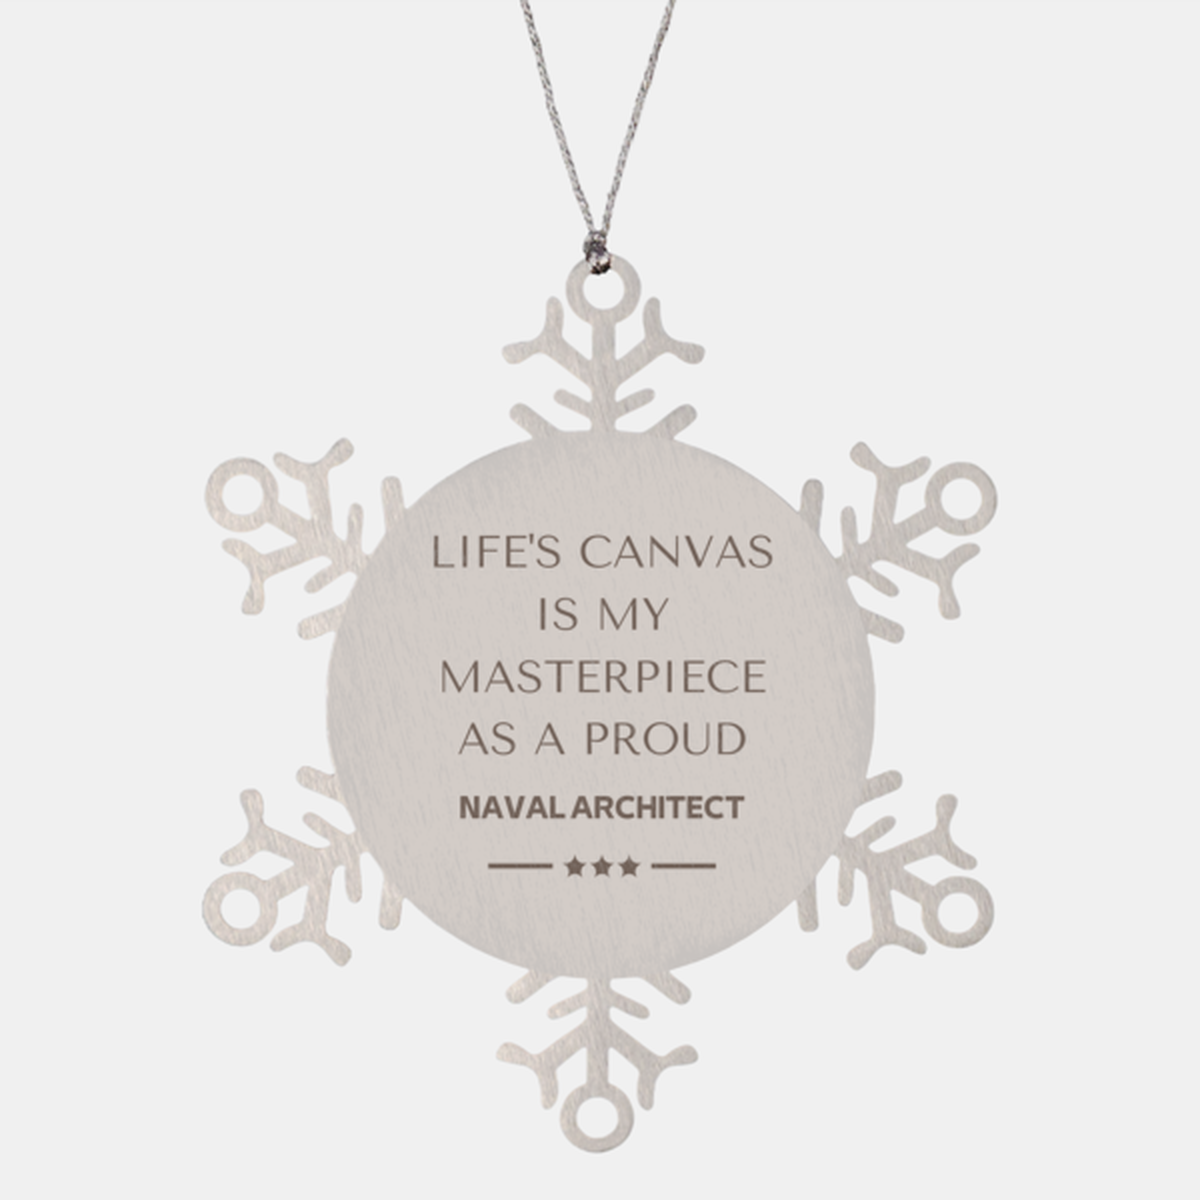 Proud Naval Architect Gifts, Life's canvas is my masterpiece, Epic Birthday Christmas Unique Snowflake Ornament For Naval Architect, Coworkers, Men, Women, Friends